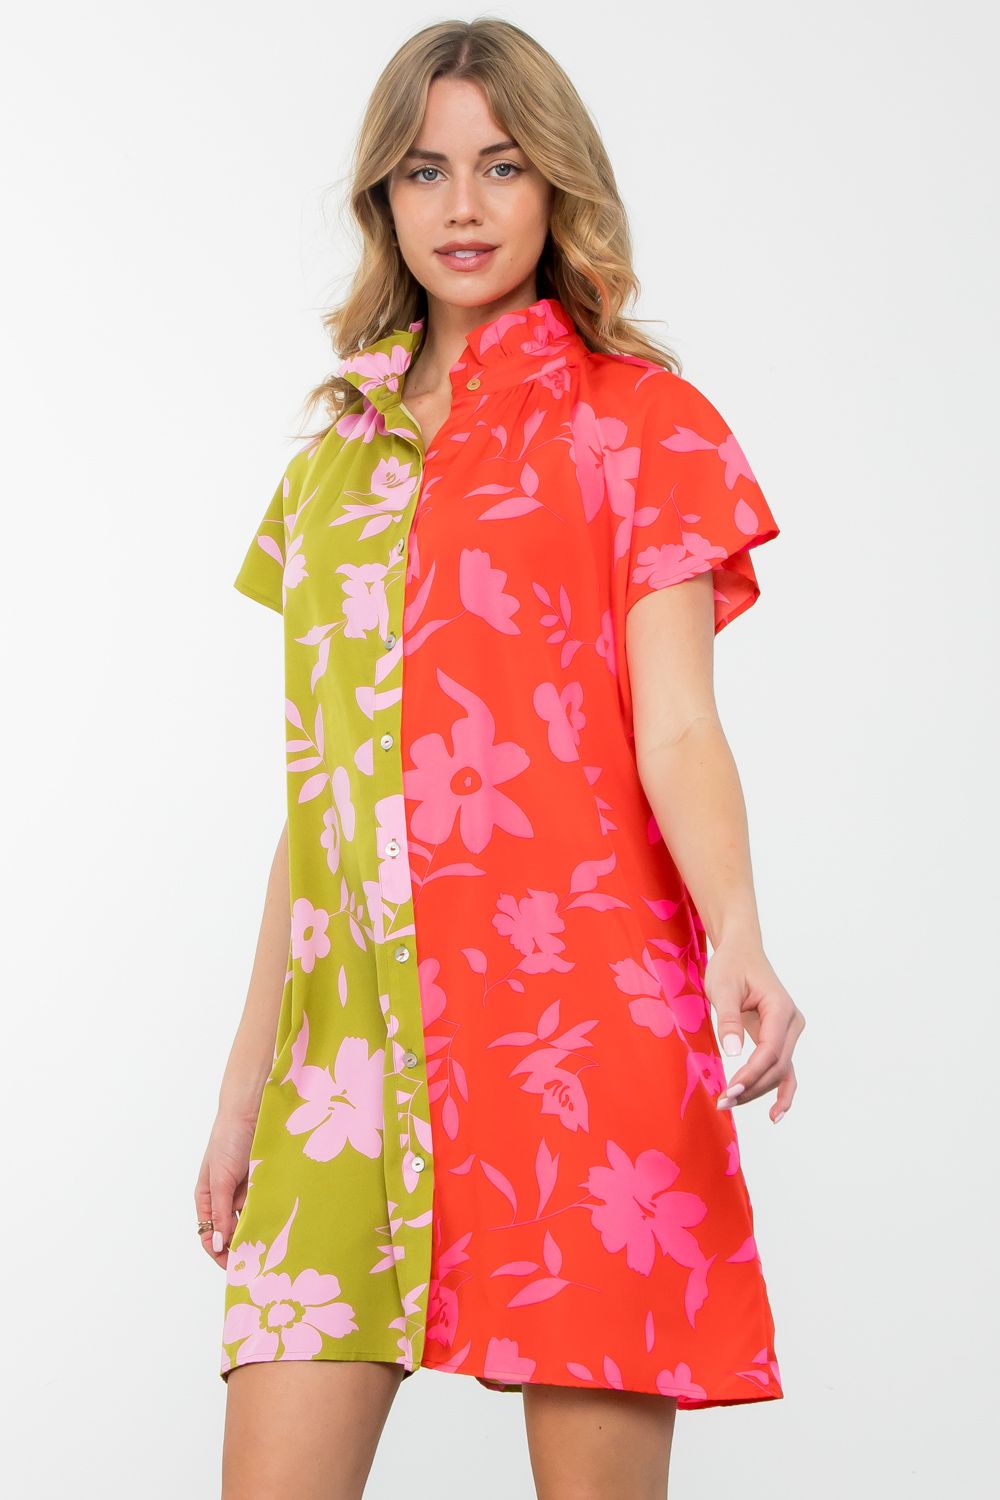 Be vibrant and chic in our colorblock floral print THML dress. Stand out in any occasion with its unique design. Feel confident and beautiful with this must-have addition to your wardrobe.